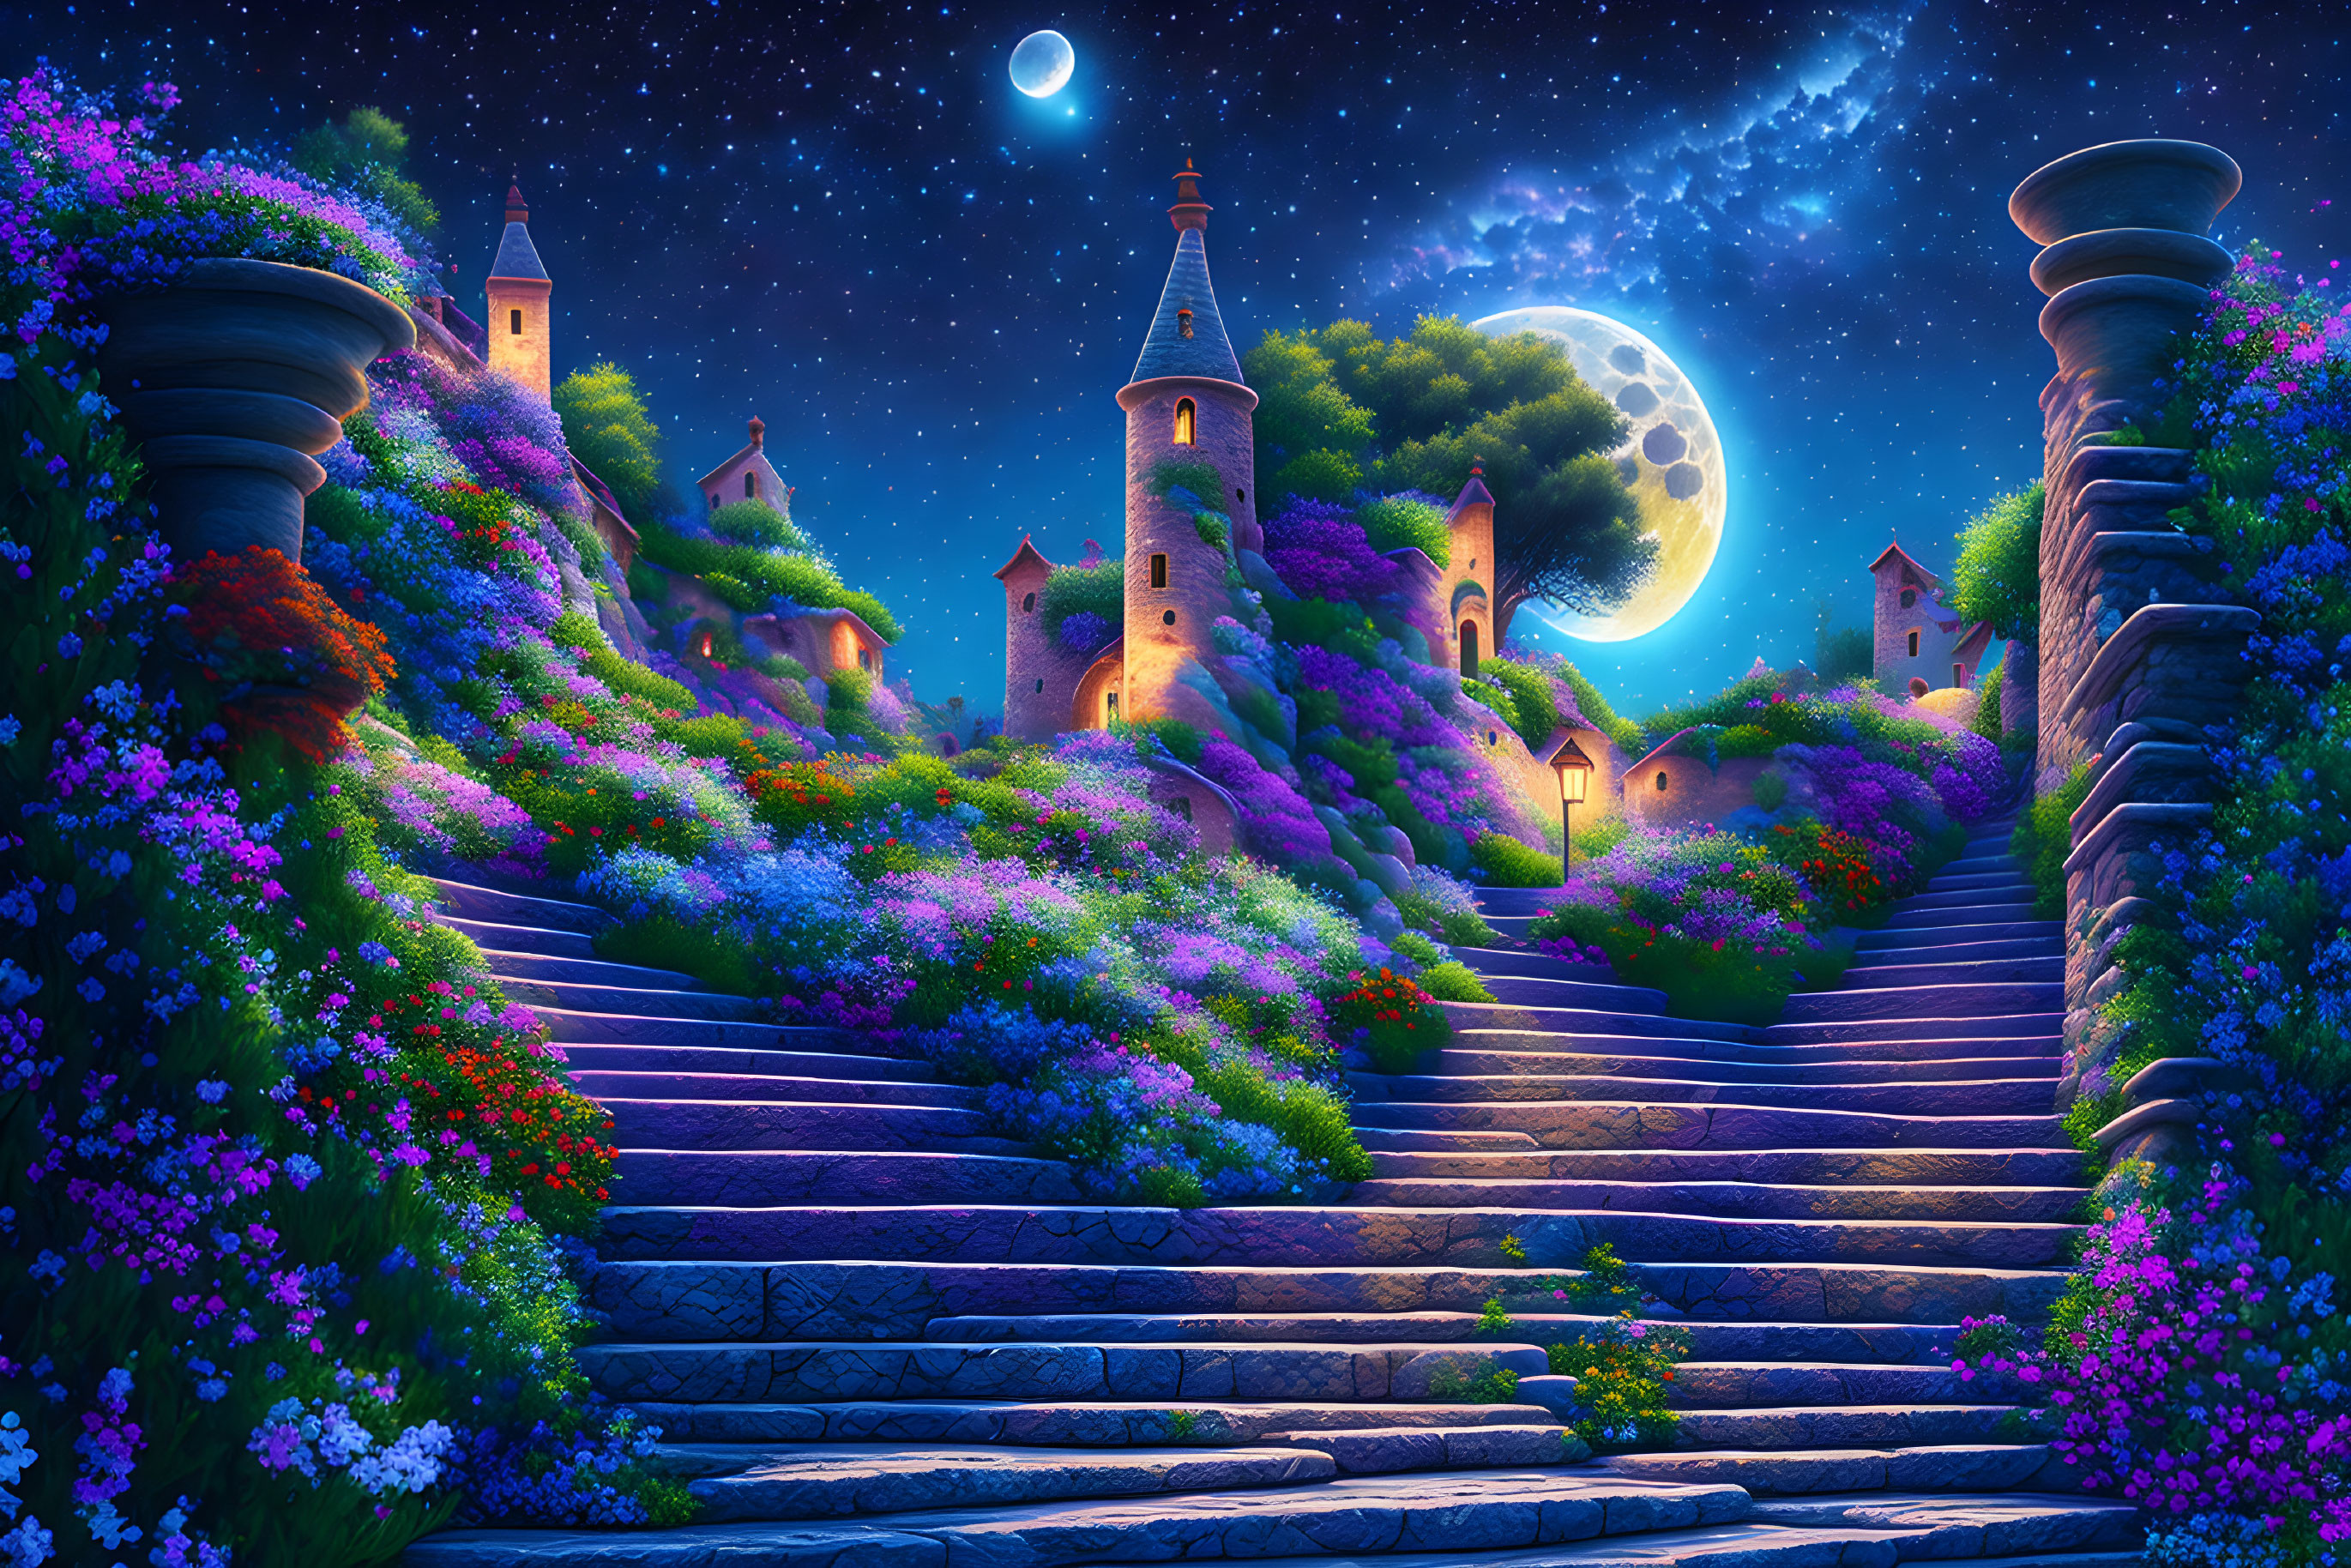 Fantasy night scene with full moon, bright flowers, cobblestone steps, quaint houses, and